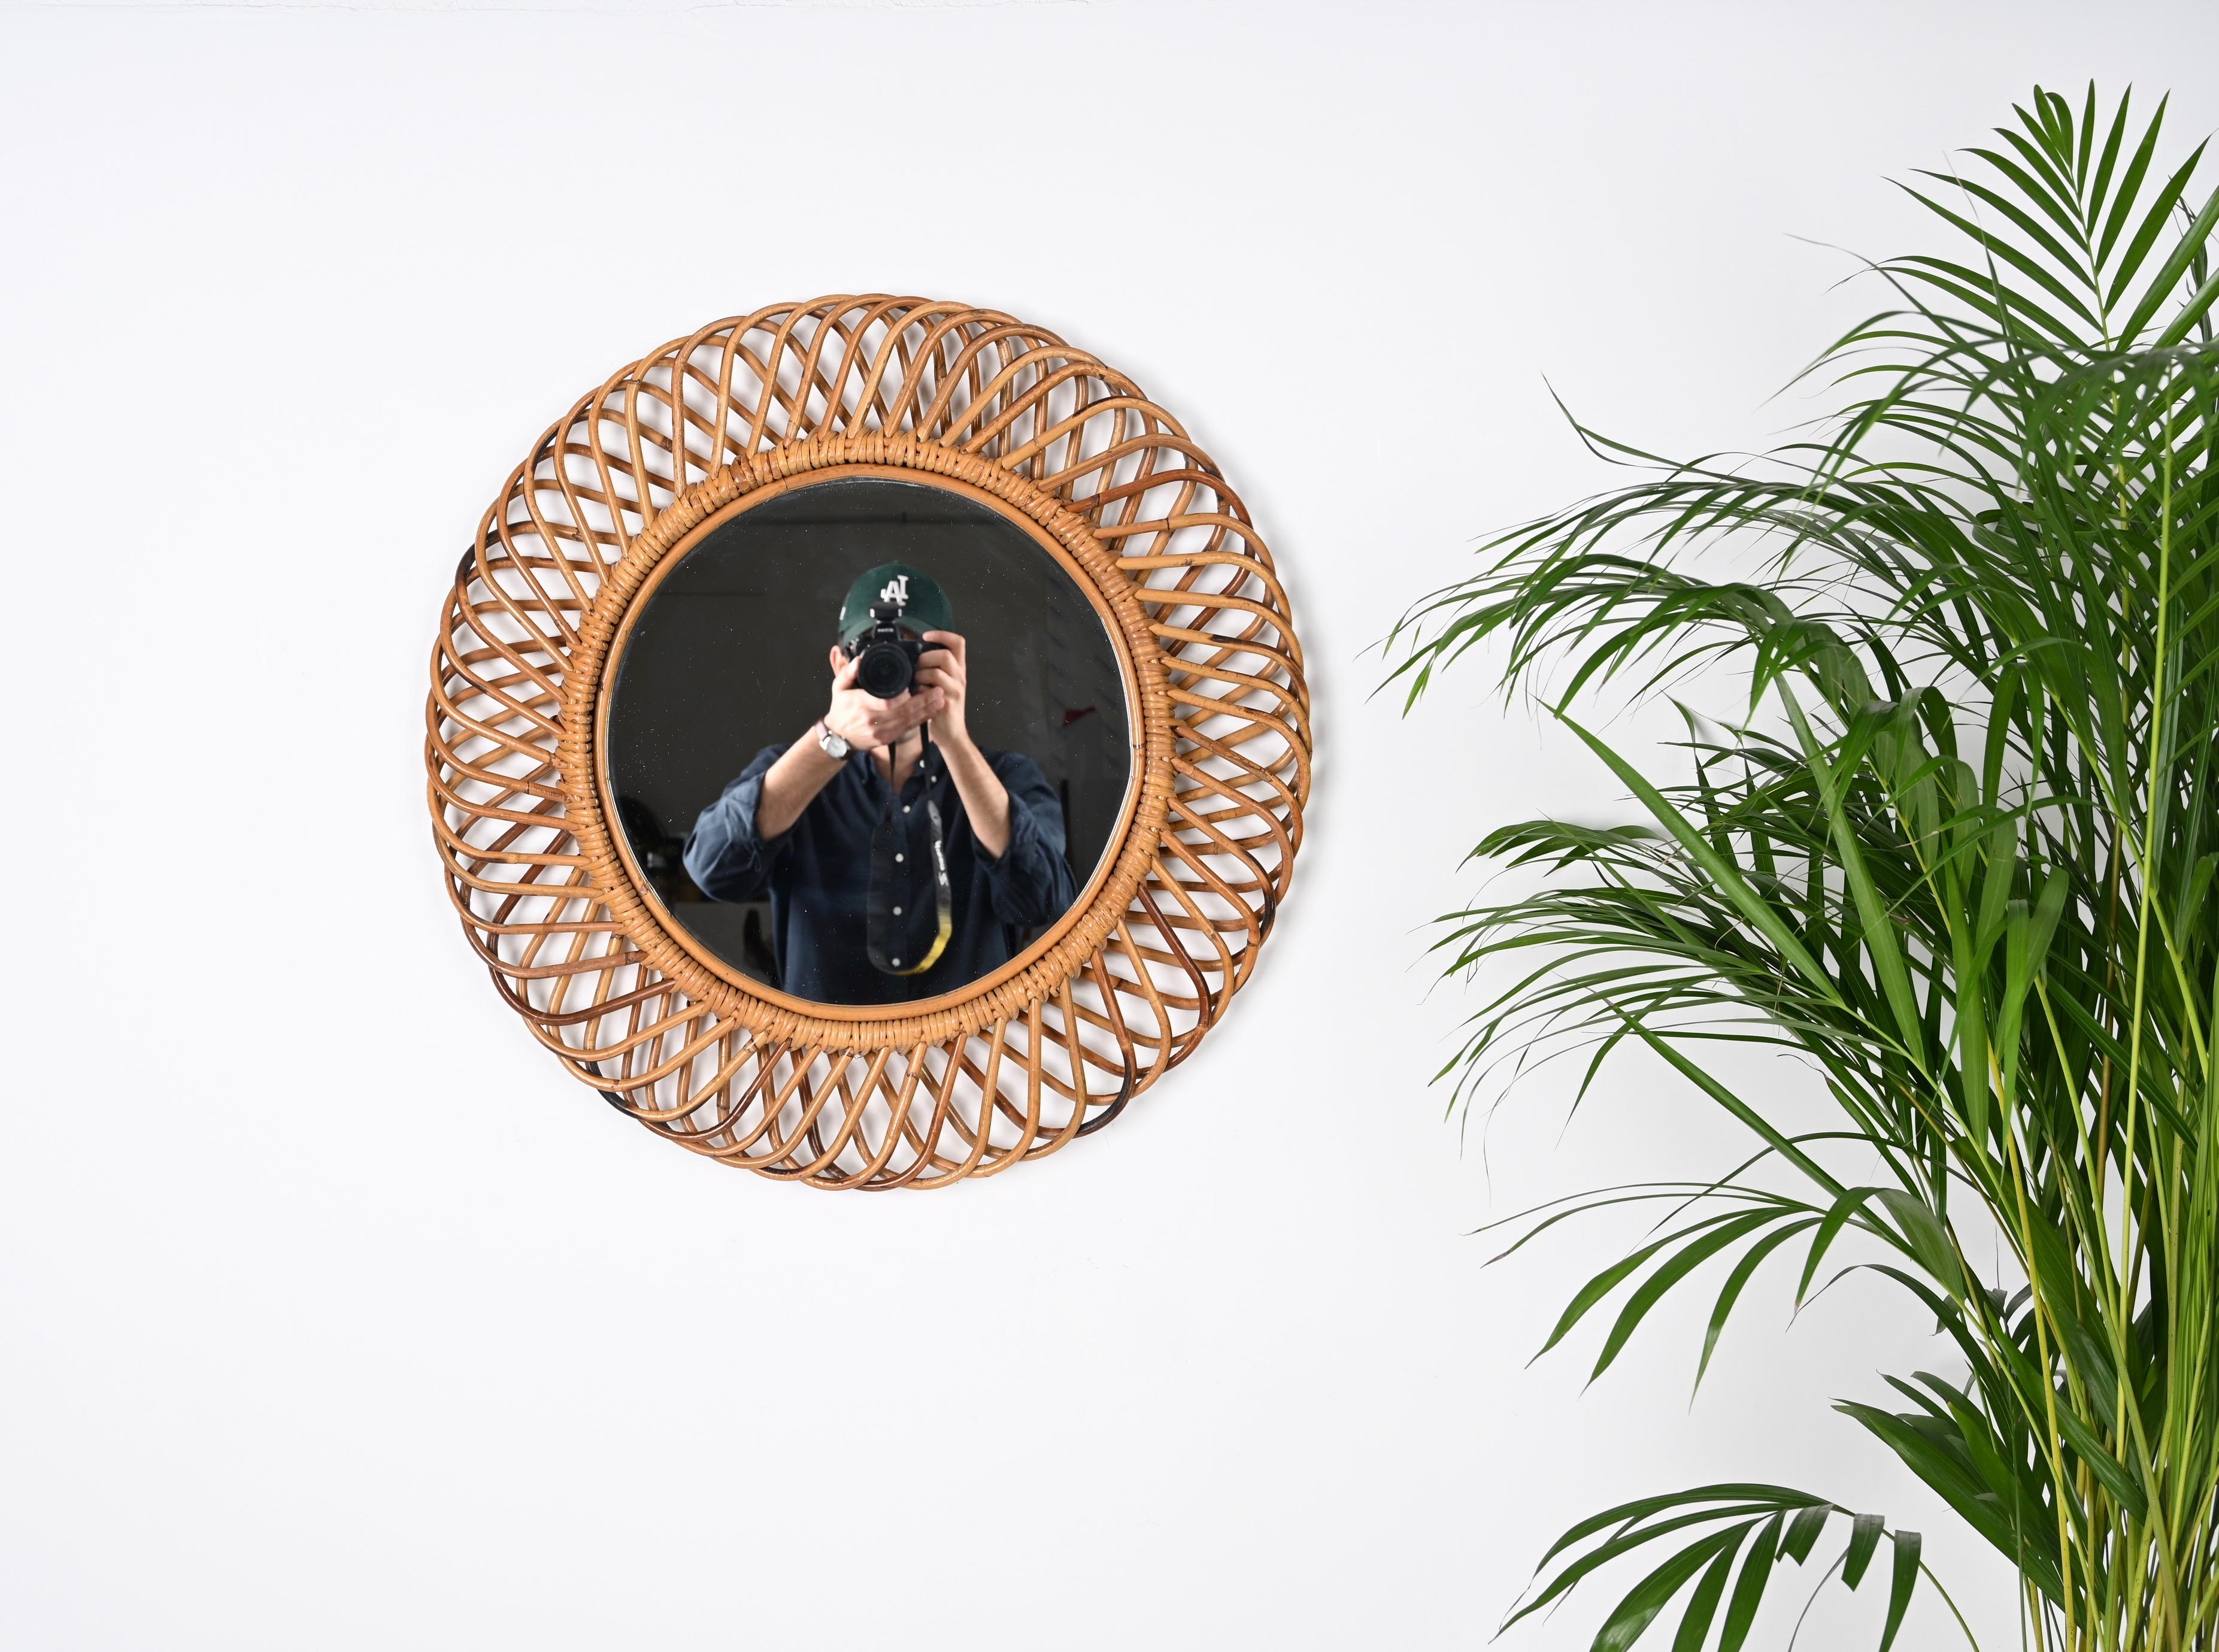 Amazing midcentury French Riviera rattan and bamboo round mirror. This marvellous object is attributed to Franco Albini as designer and Bonacina and was produced in Italy during the 1960s.

This decorative oval mirror is unique as it has a curved